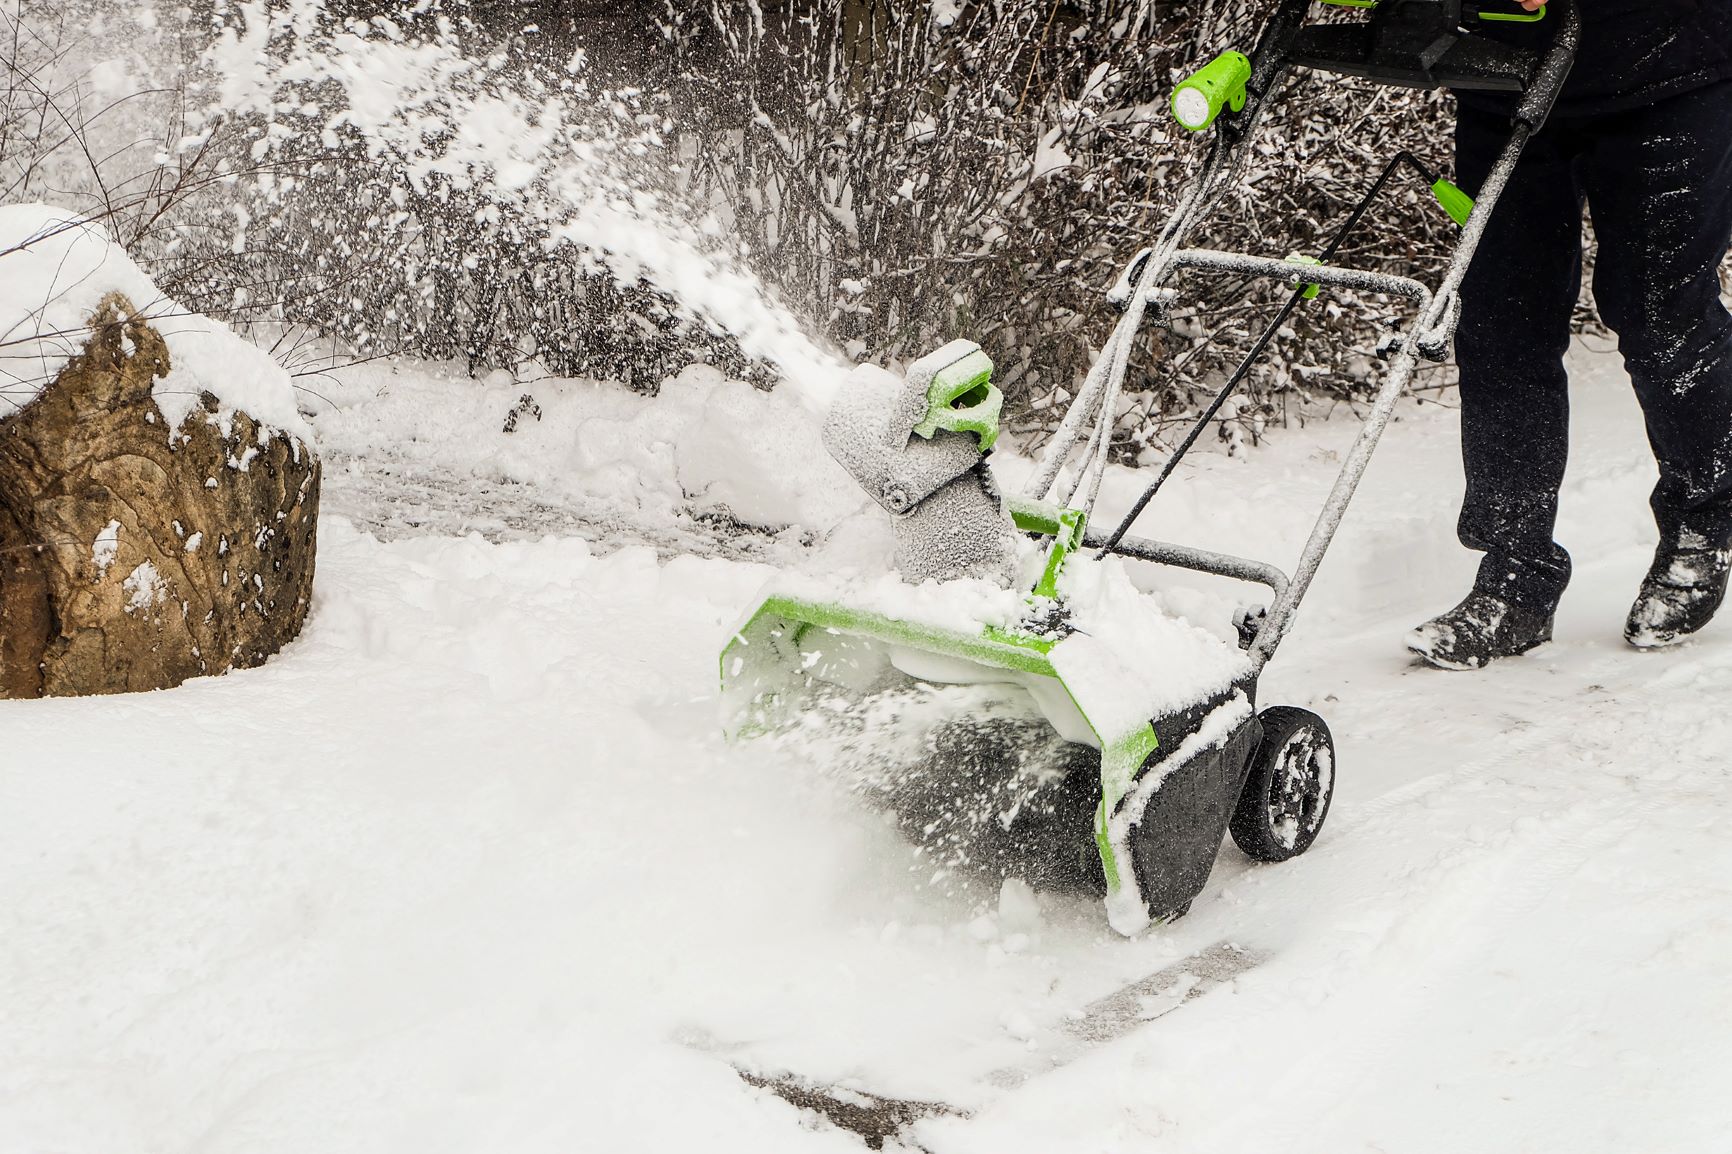 Take Charge of Snow Removal with an Electric Snow Blower